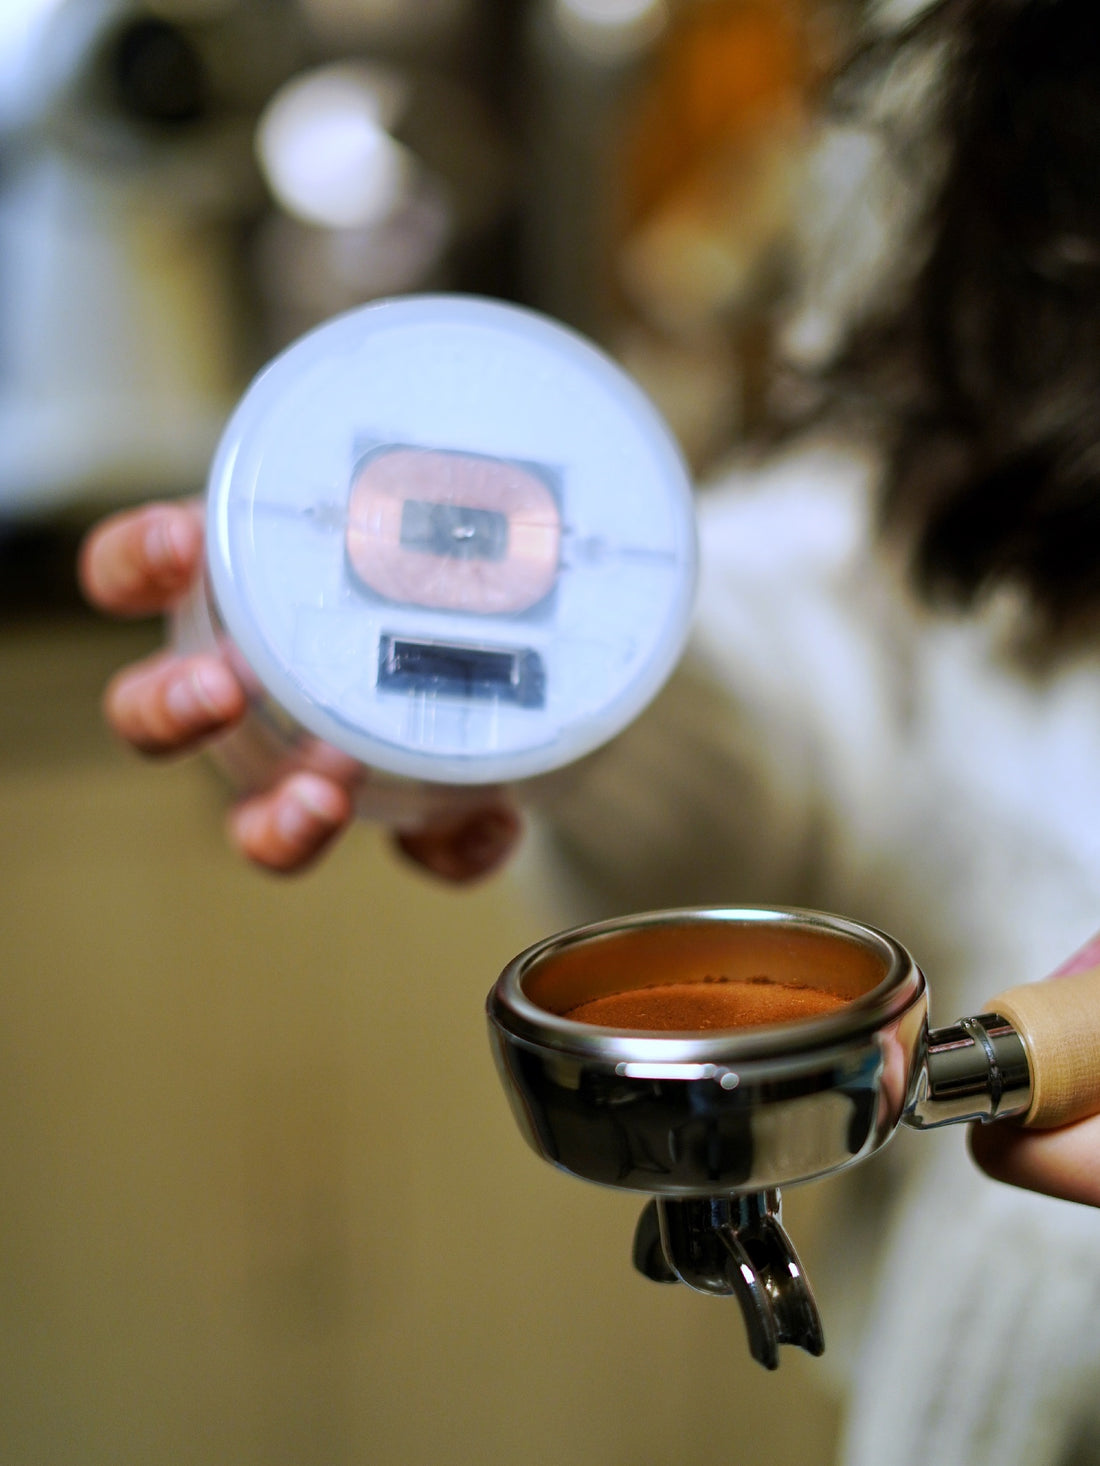 Introducing the Electronic Espresso Tamper from BOSeTamper